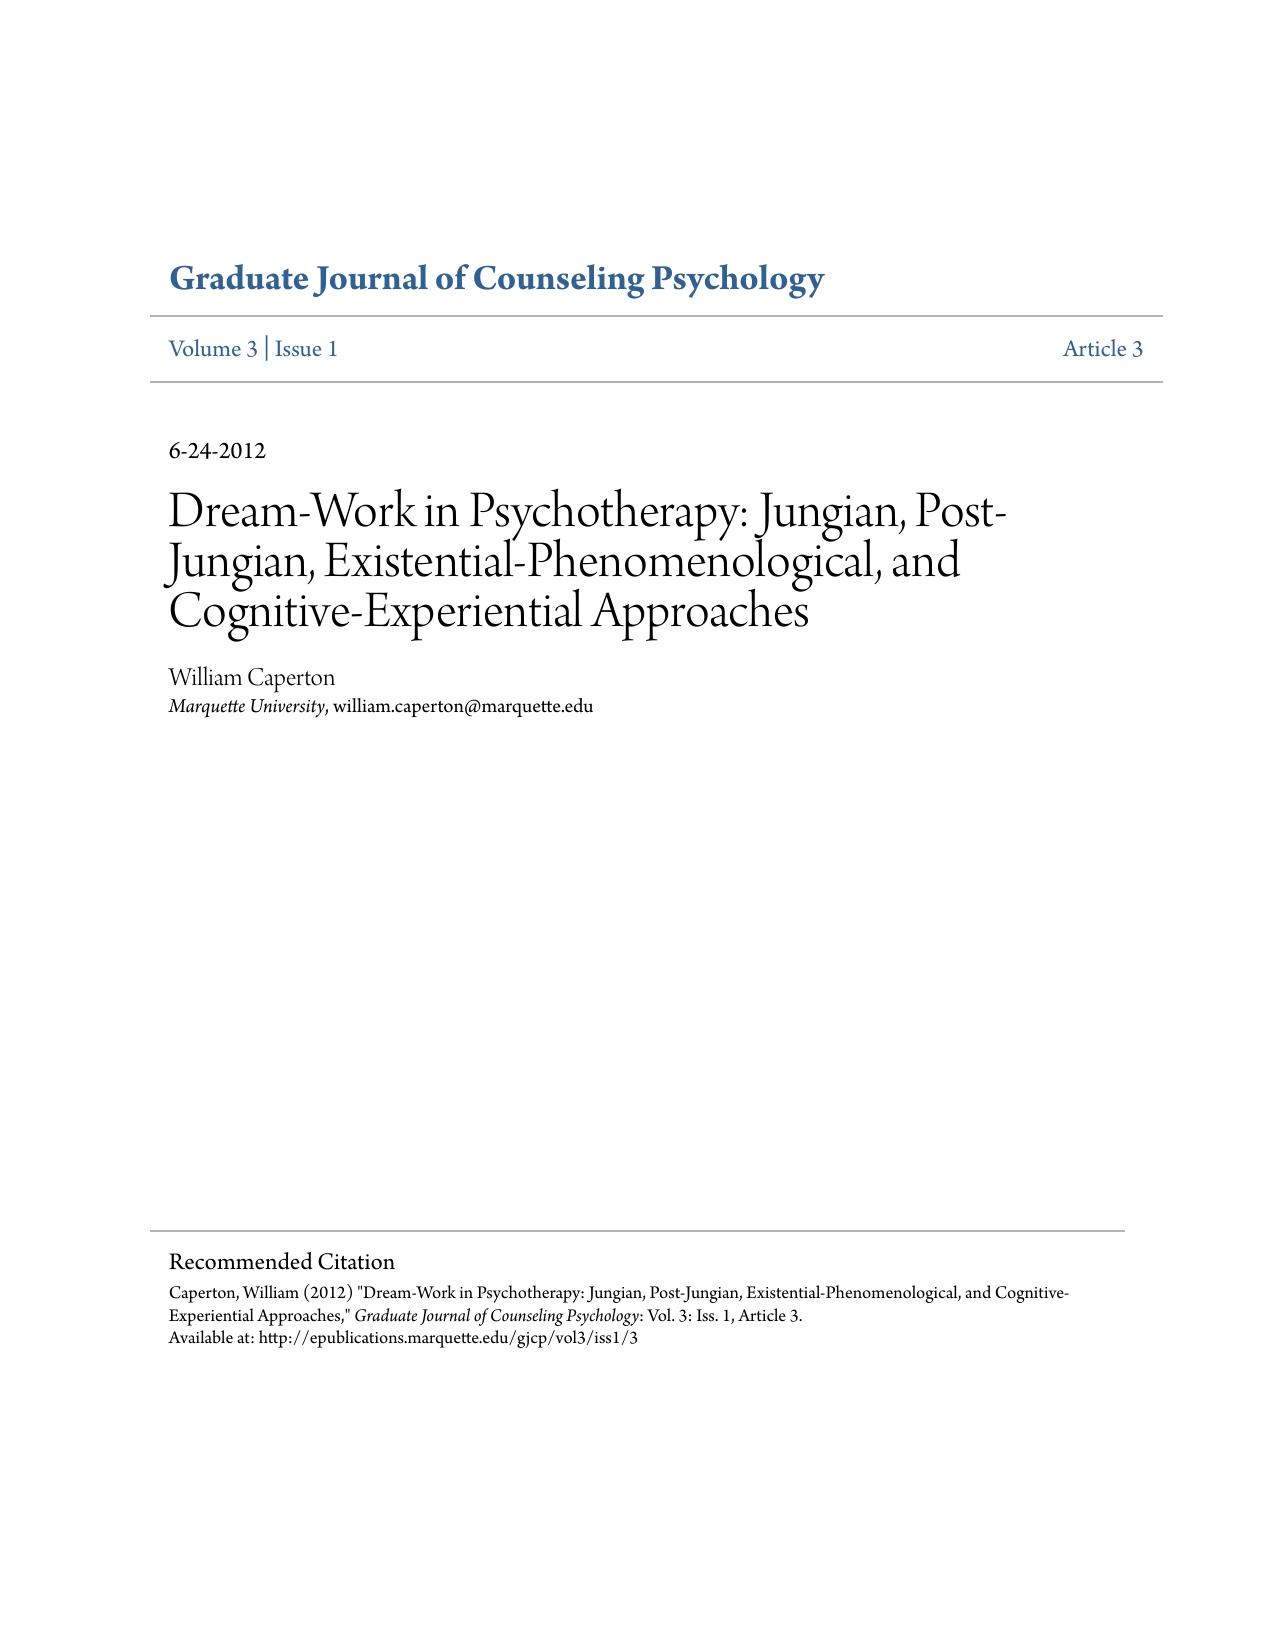 Dream-Work in Psychotherapy: Jungian, Post-Jungian, Existential-Phenomenological, and Cognitive-Experiential Approaches